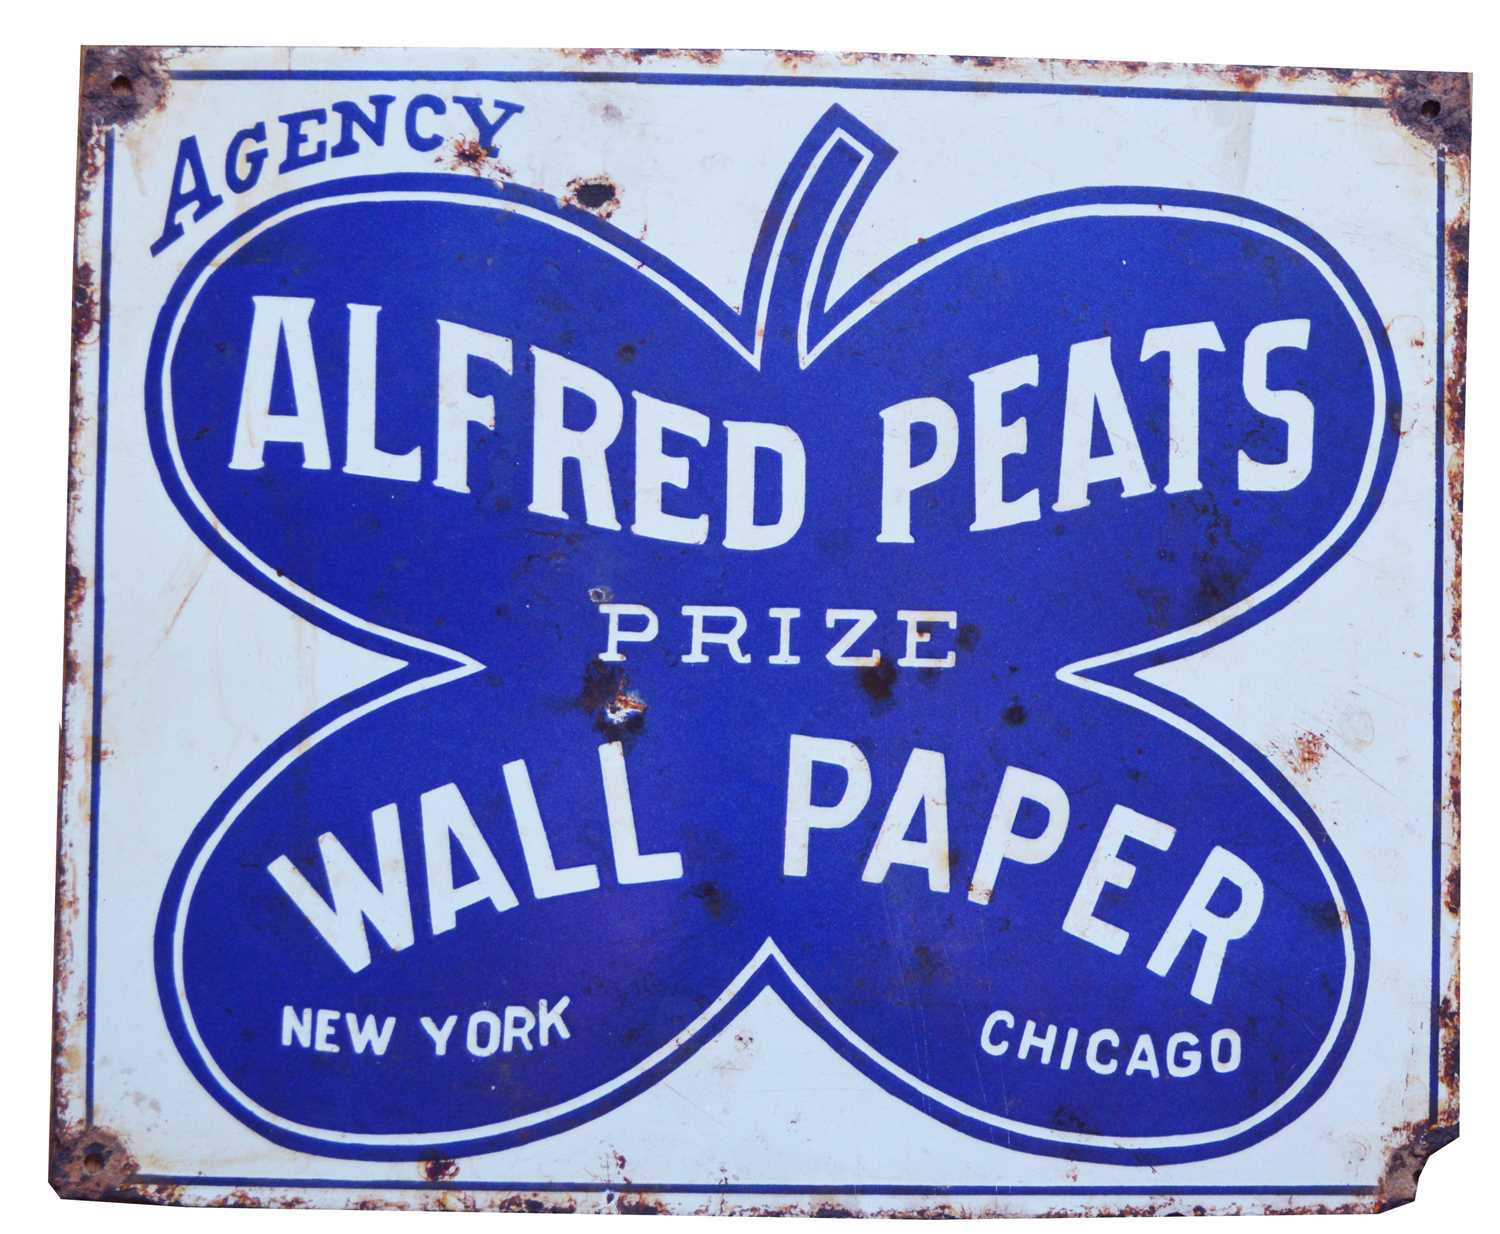 Lot 795 - Alfred Peats Wall Paper enamel advertising sign